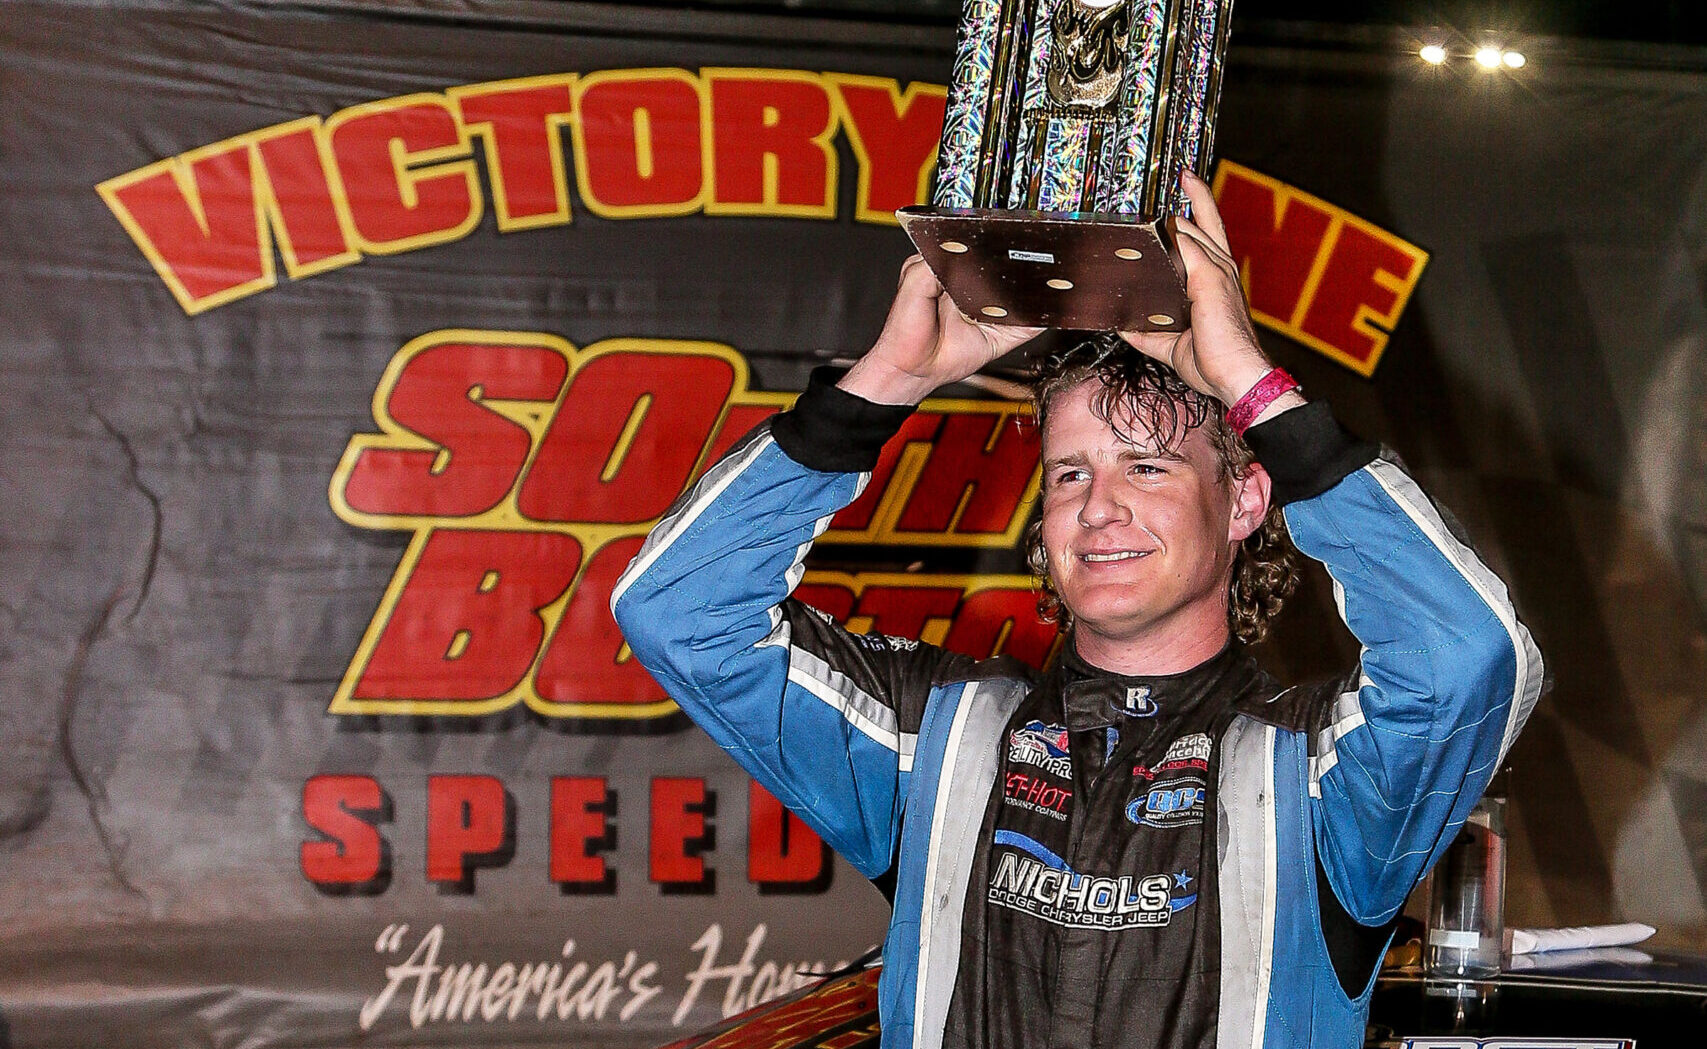 WITH WIN BORST CONTINUES TO IMPRESS AS ONE OF NEW LATE MODEL FRONTRUNNERS AT SOUTH BOSTON SPEEDWAY